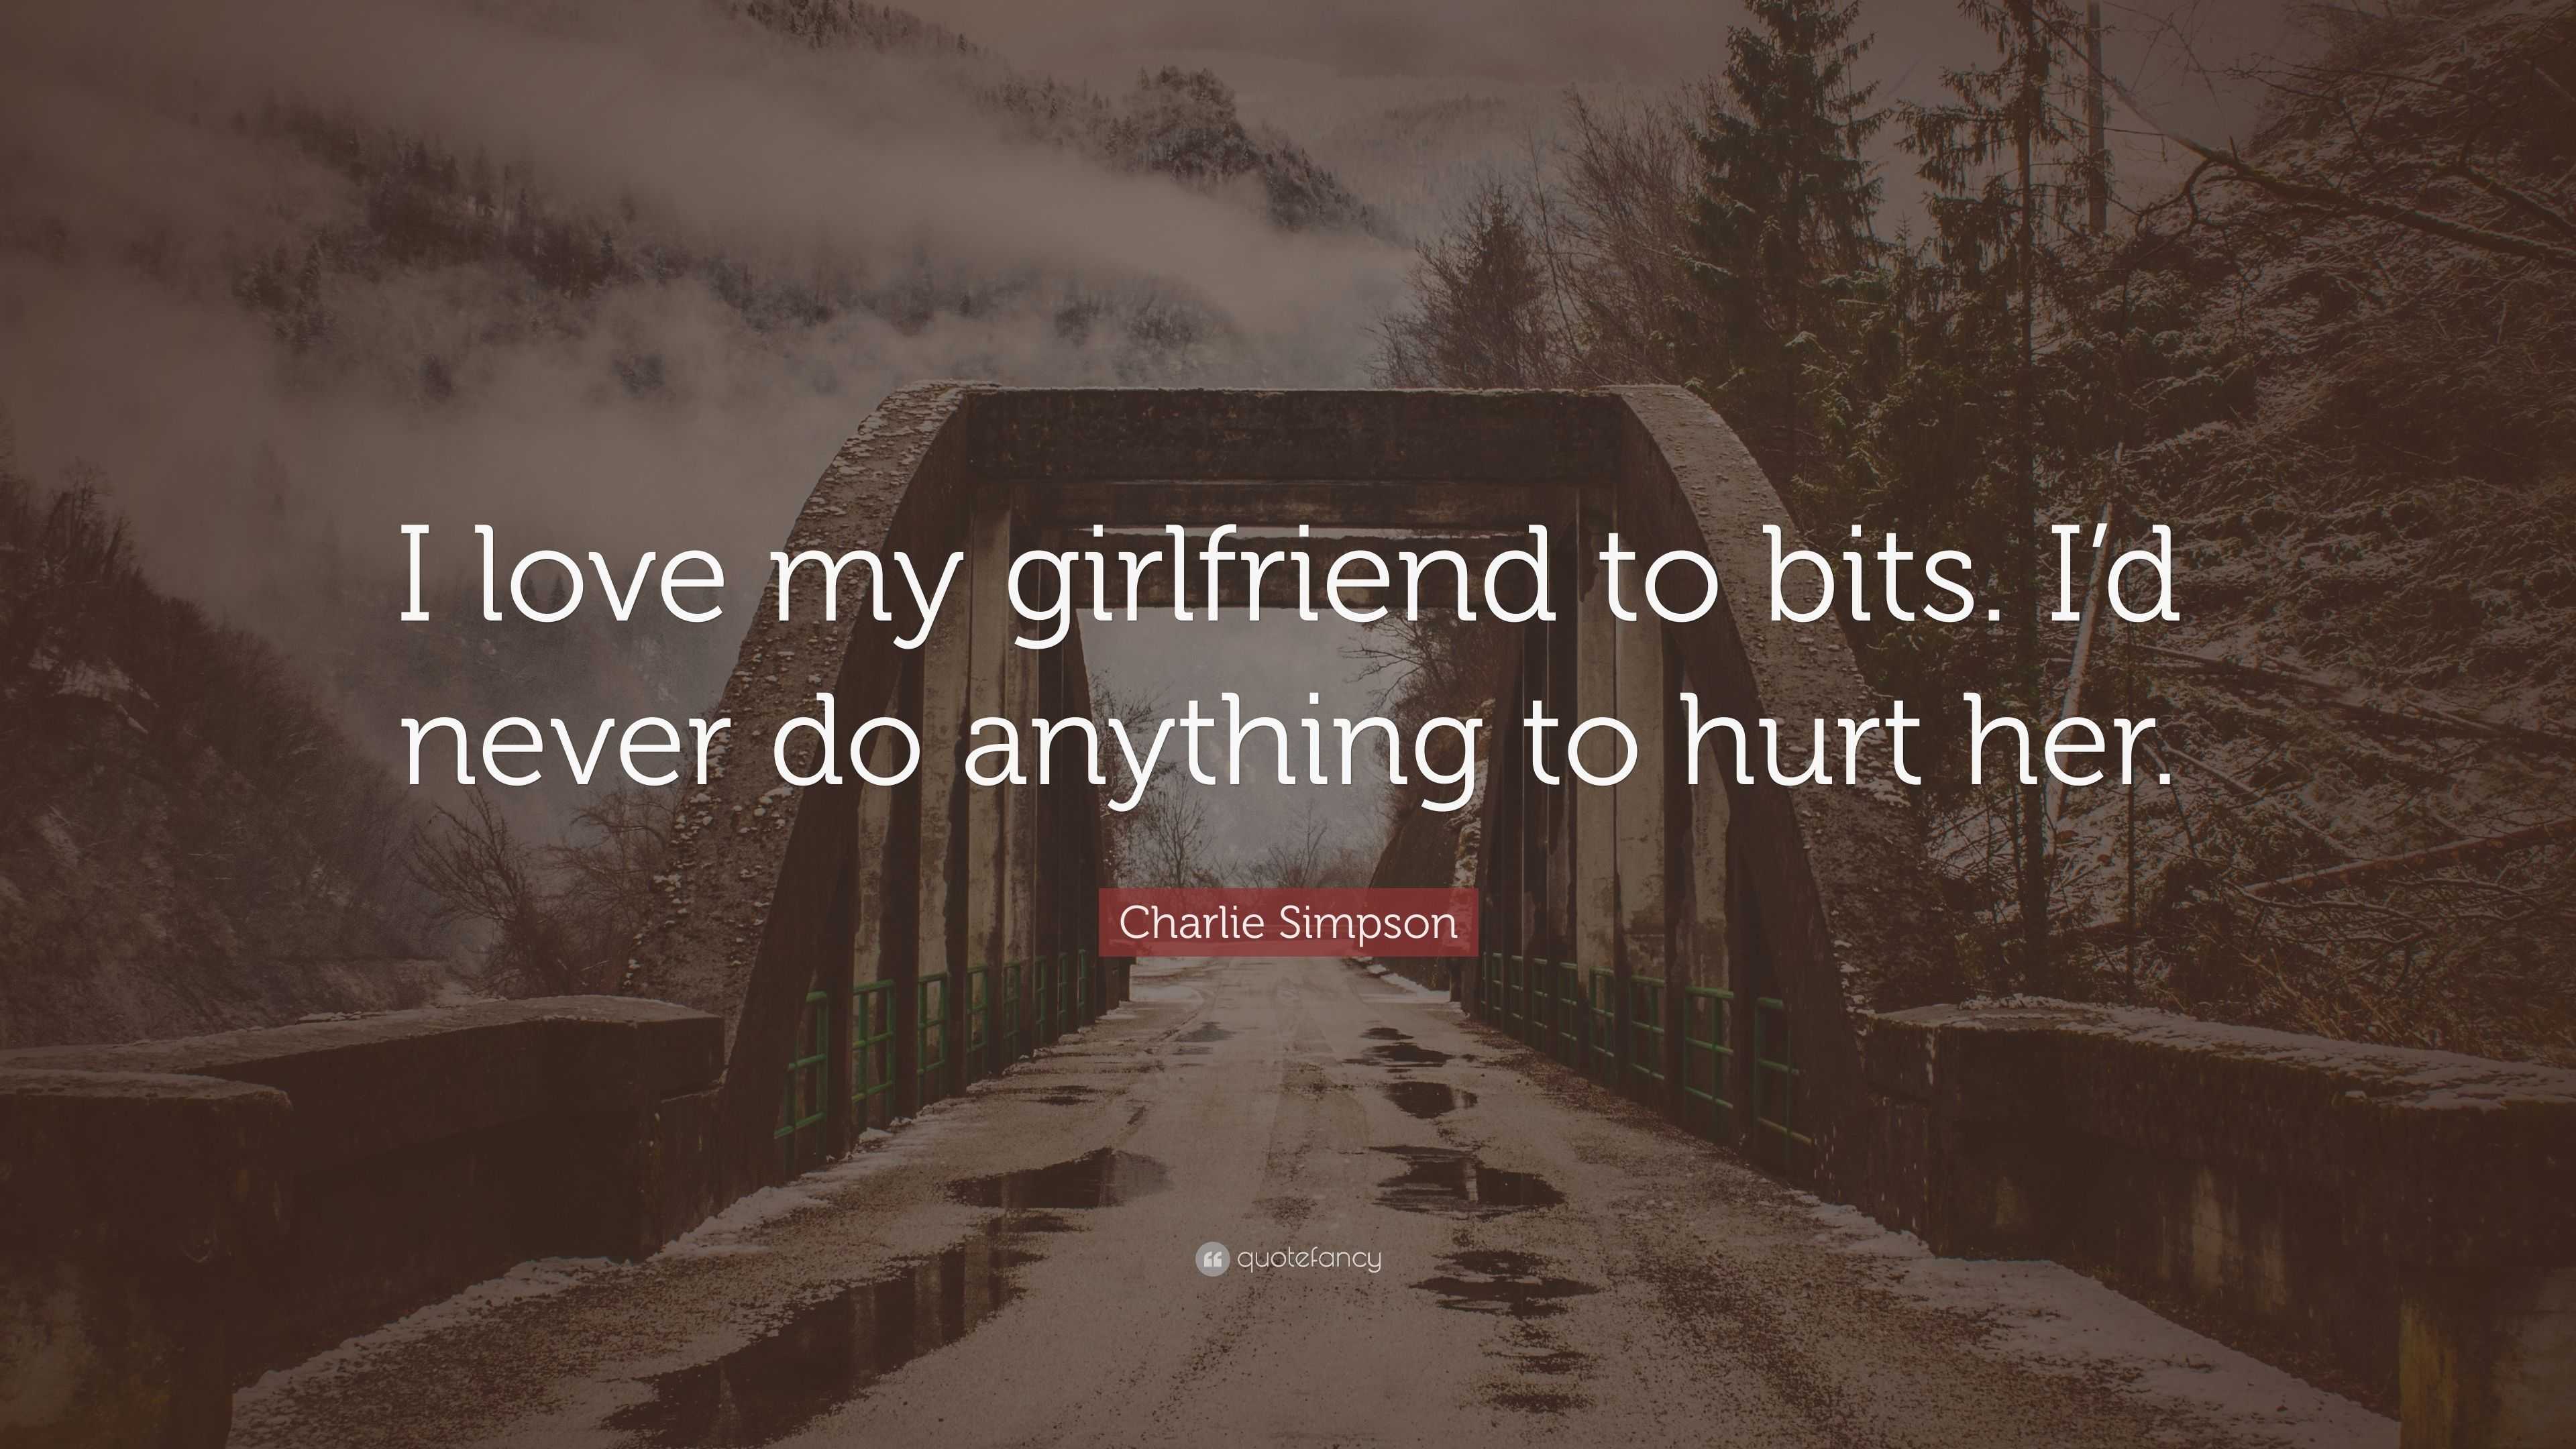 Charlie Simpson Quote: “I love my girlfriend to bits. I'd never do anything  to hurt